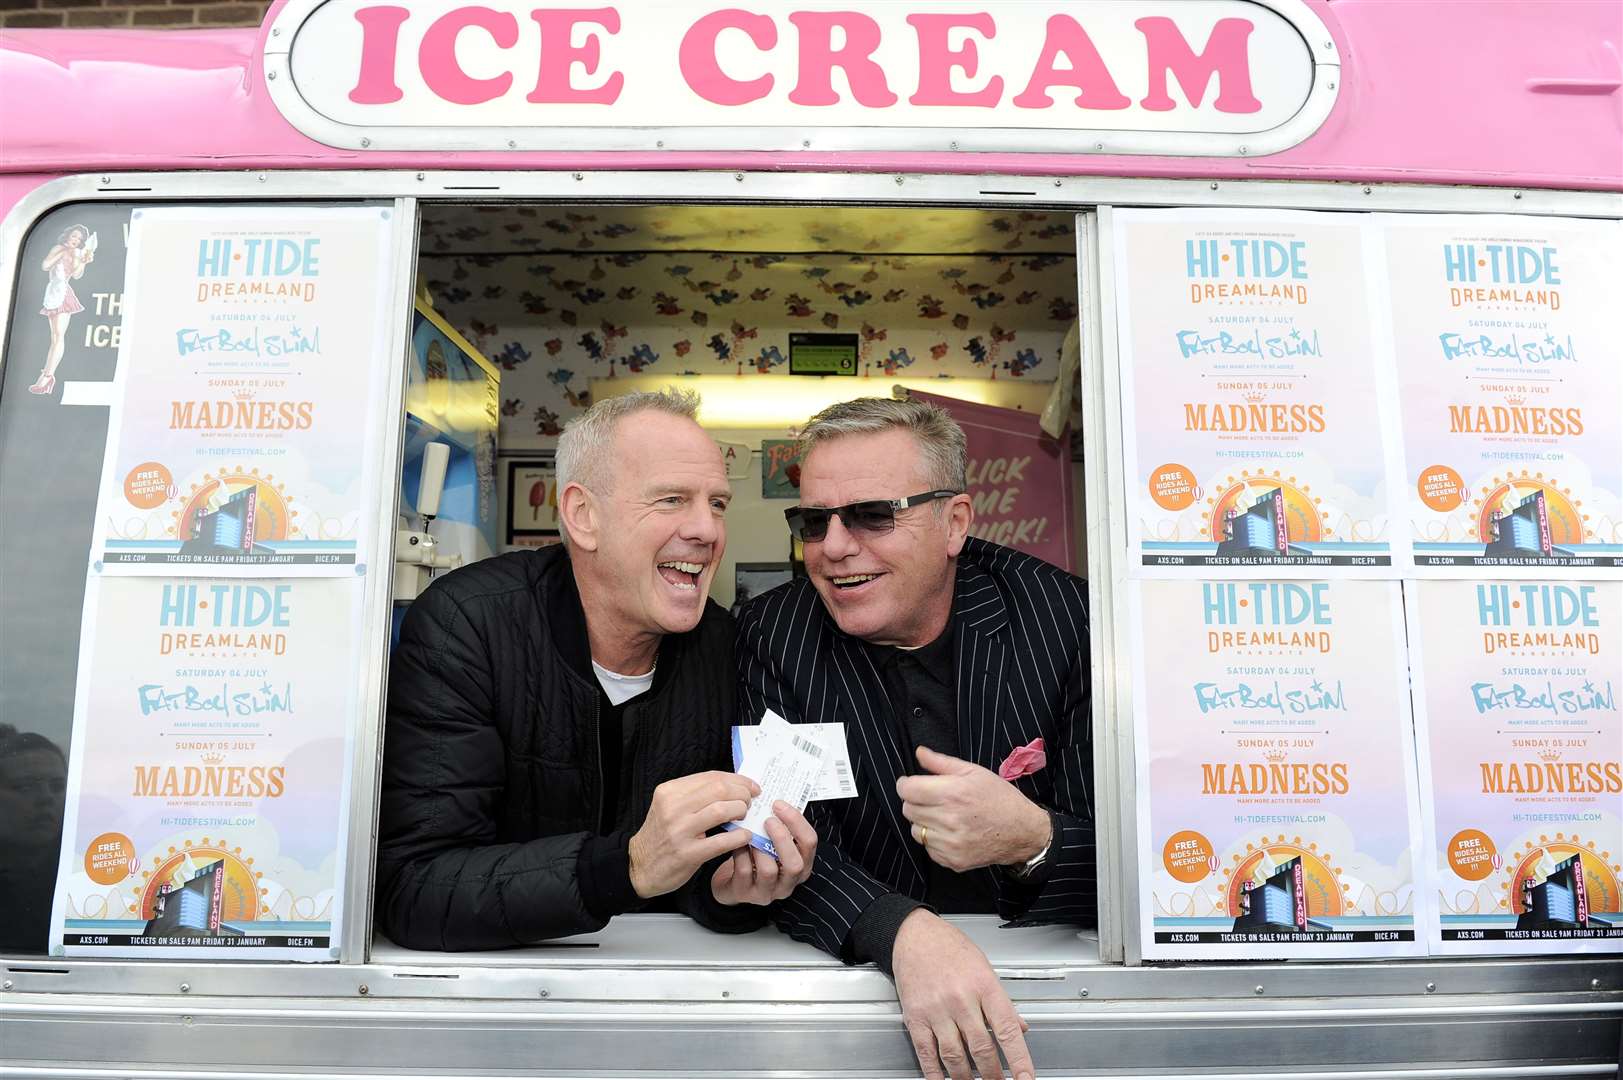 Fatboy Slim) and Madness will headline the festival